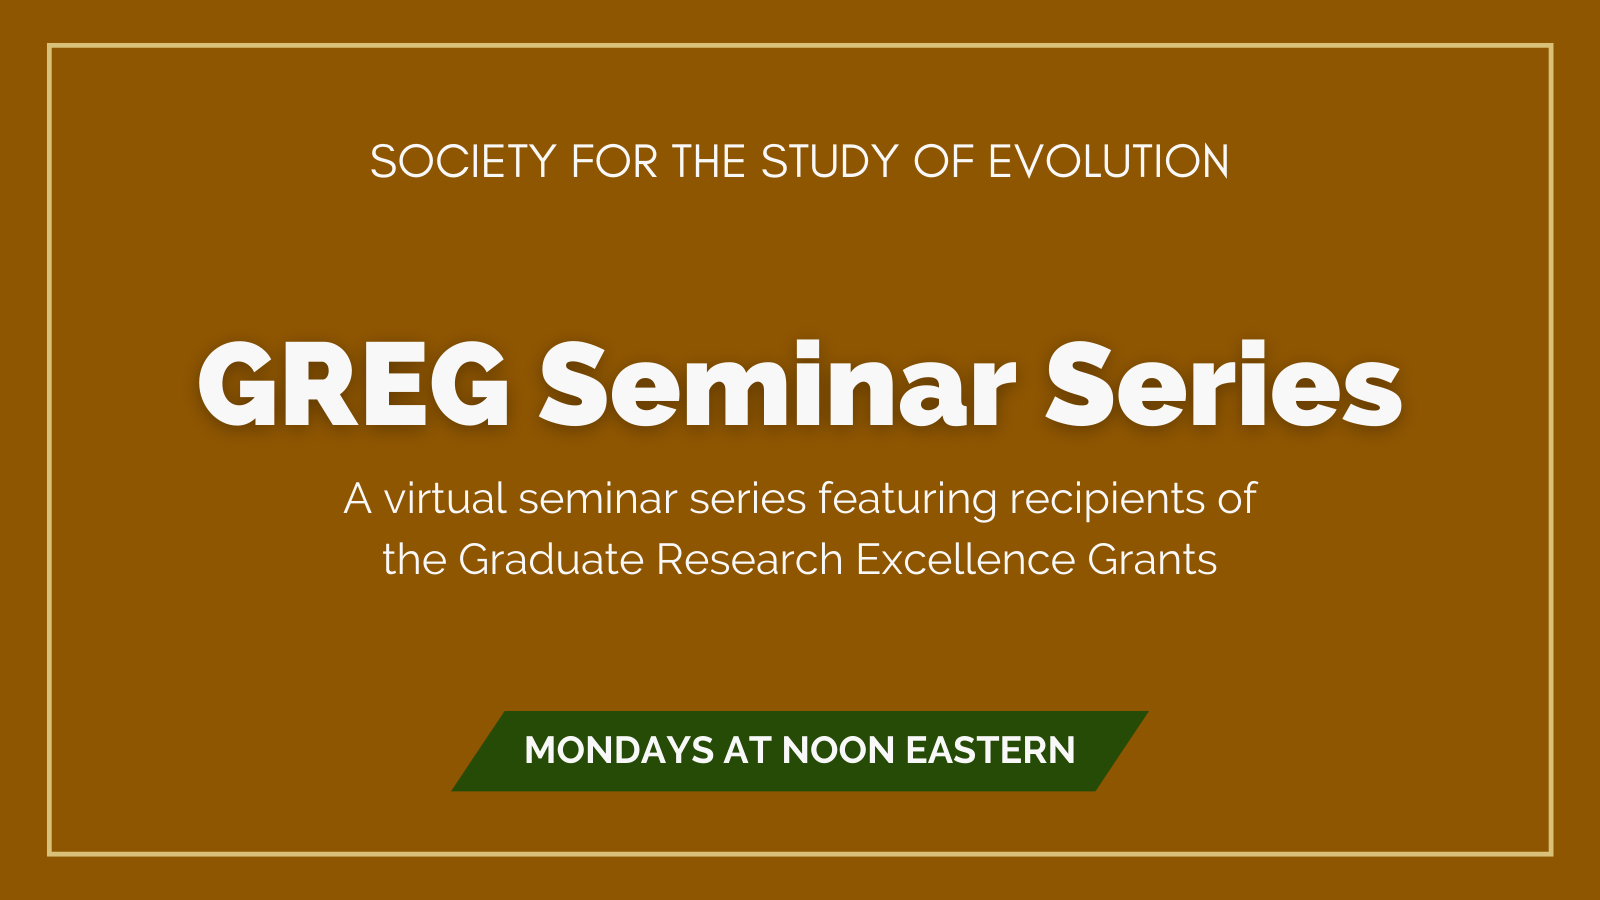 Text: Society for the Study of Evolution GREG Seminar Series. A virtual seminar series featuring recipients of the Graduate Research Excellence Grants. Mondays at Noon Eastern.